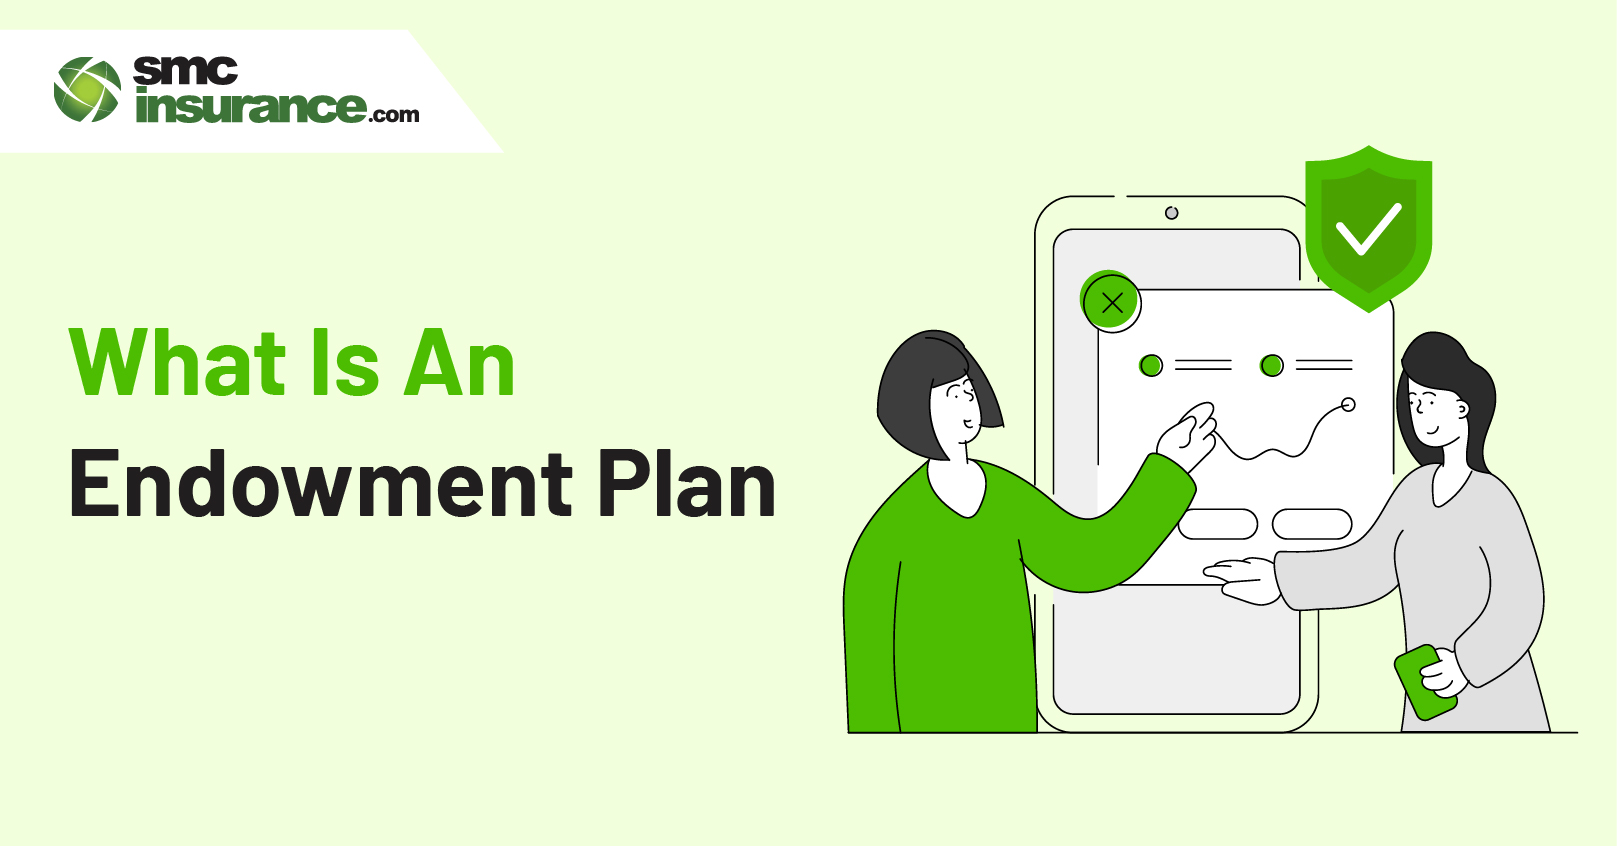 What is An Endowment Plan?